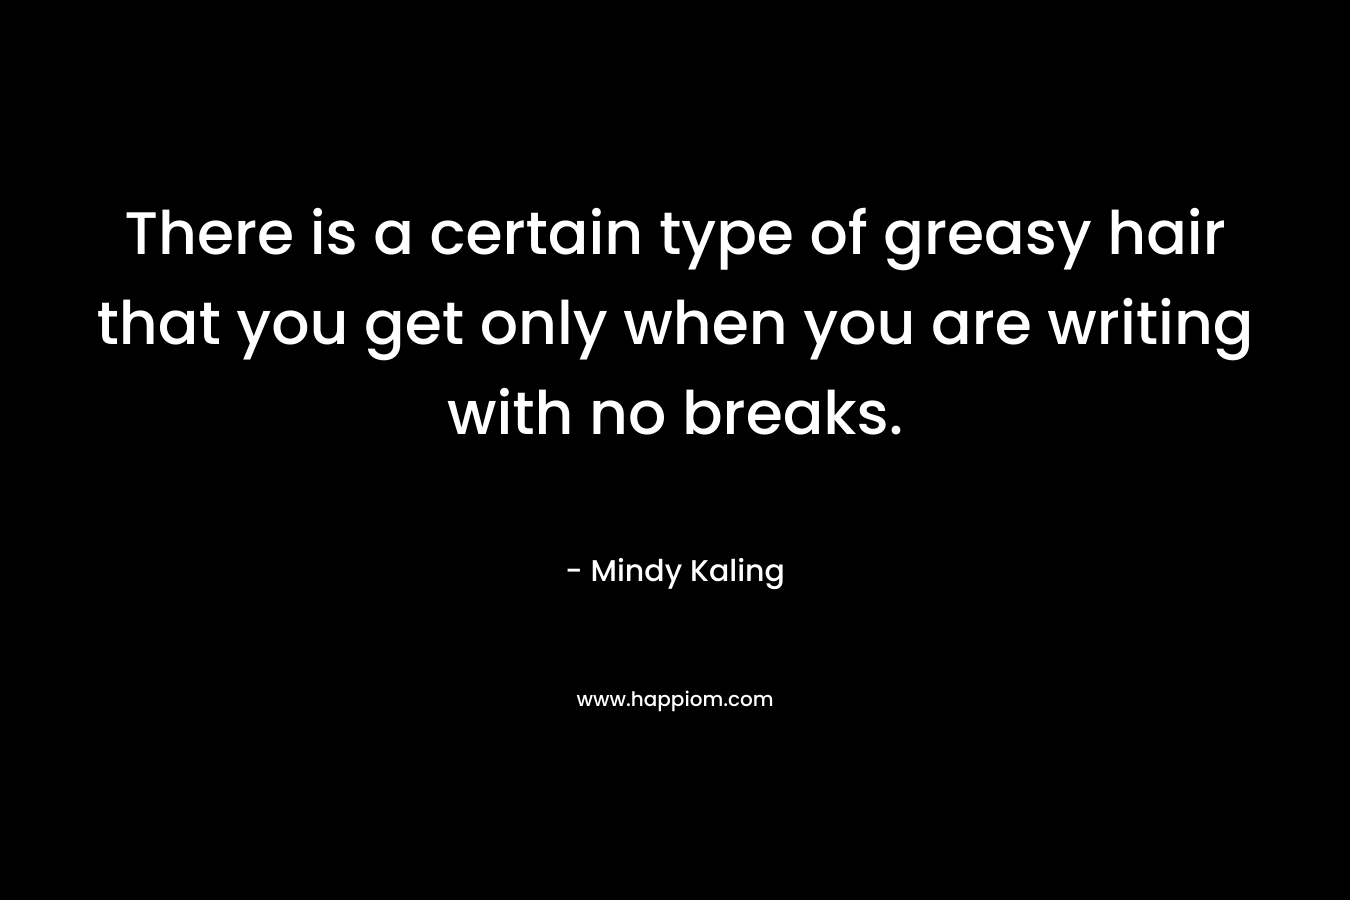 There is a certain type of greasy hair that you get only when you are writing with no breaks. – Mindy Kaling